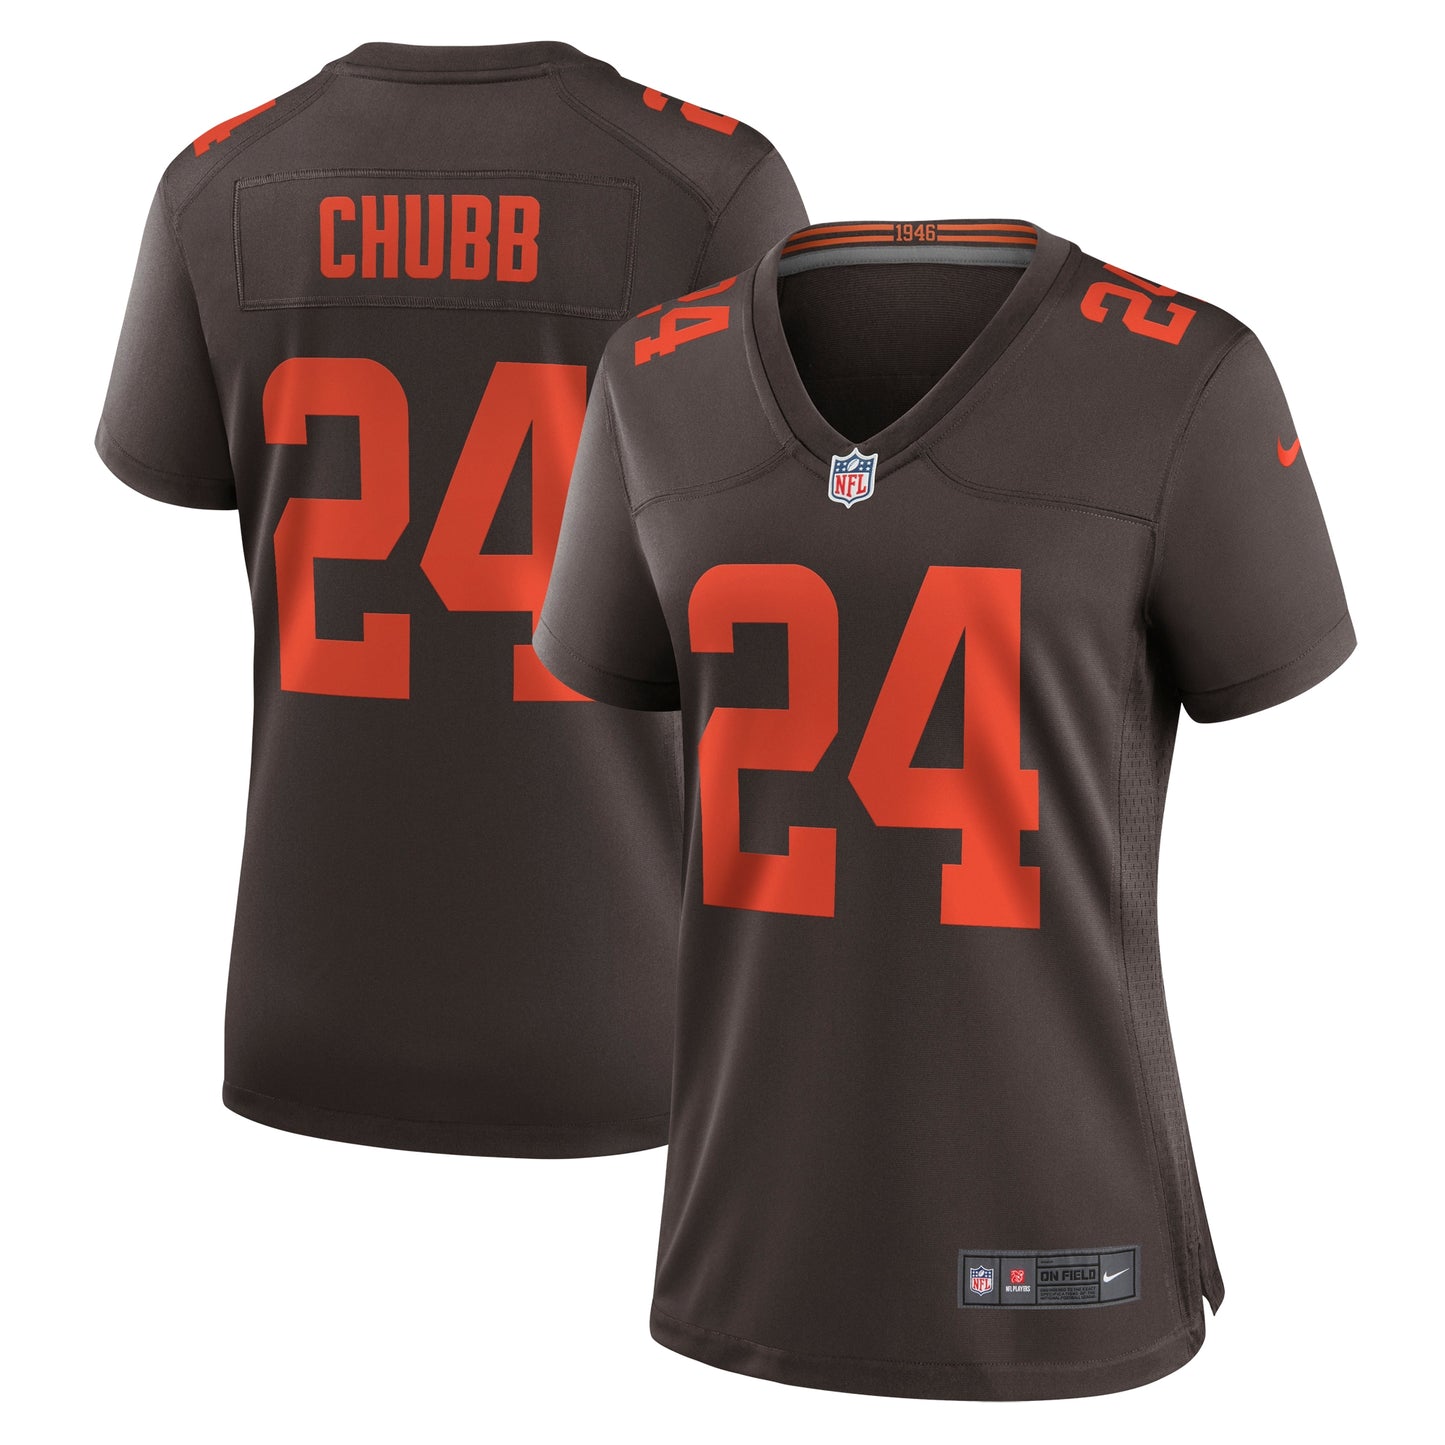 Nick Chubb Cleveland Browns Nike Women's Alternate Game Jersey - Brown